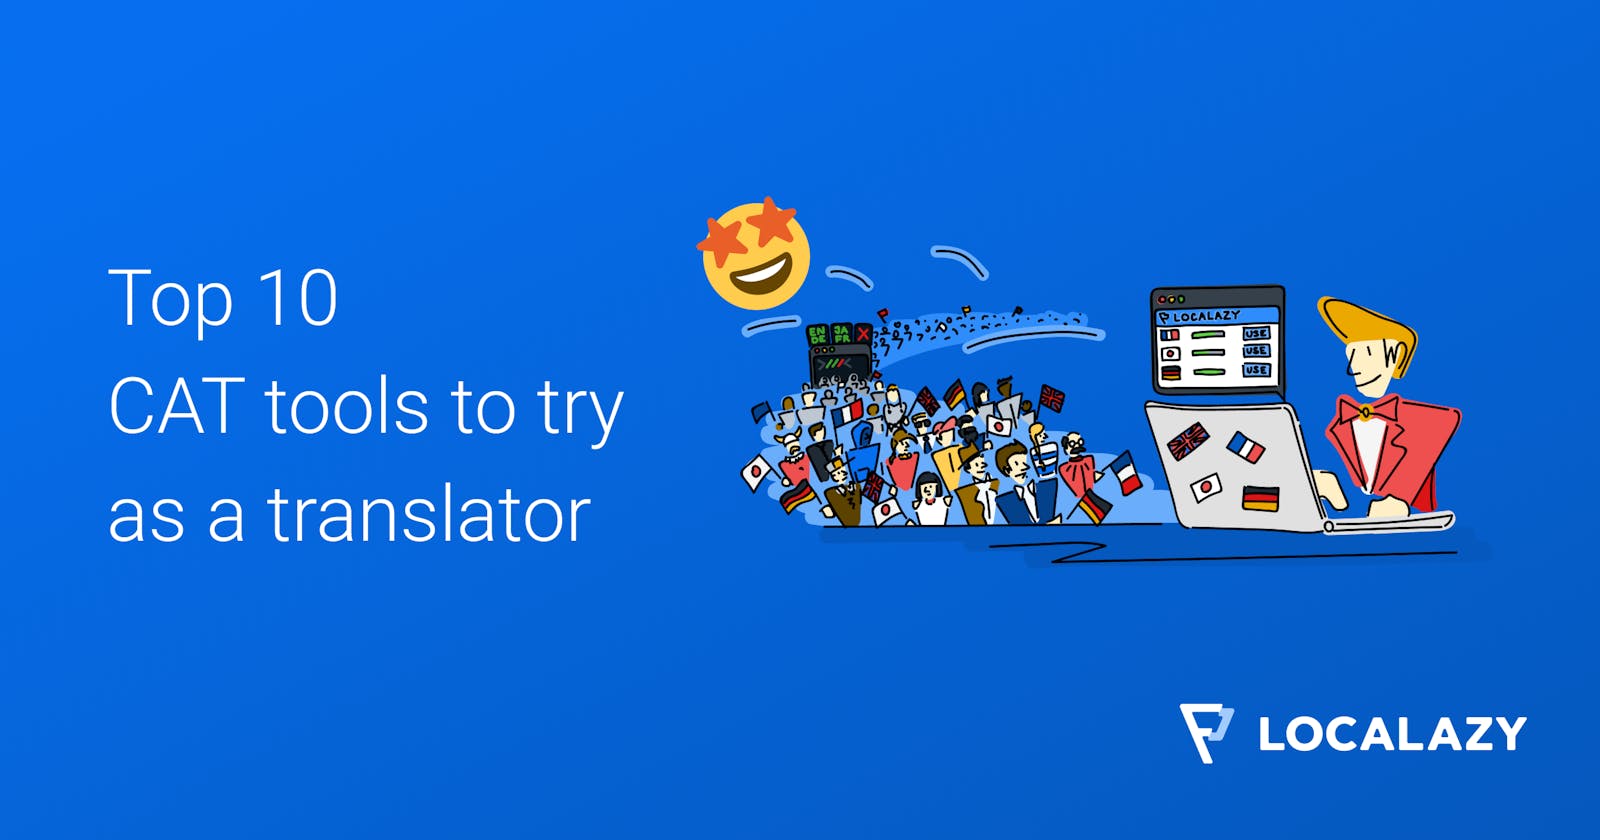 Top 10 CAT Tools to try in 2022 as a translator